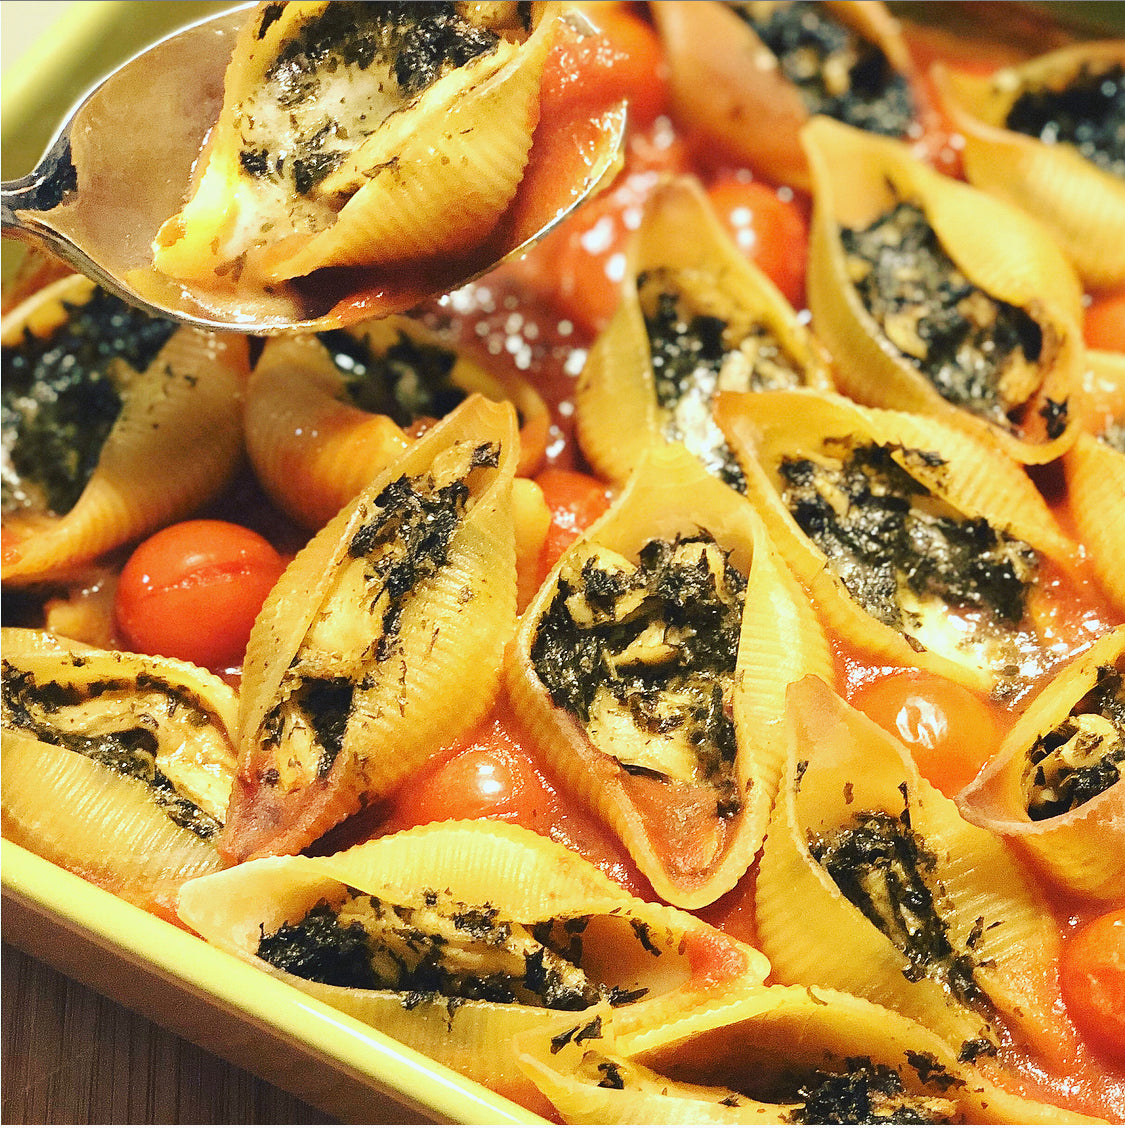 Rich And Creamy Vegetarian Pasta Bake With A Persian Twist